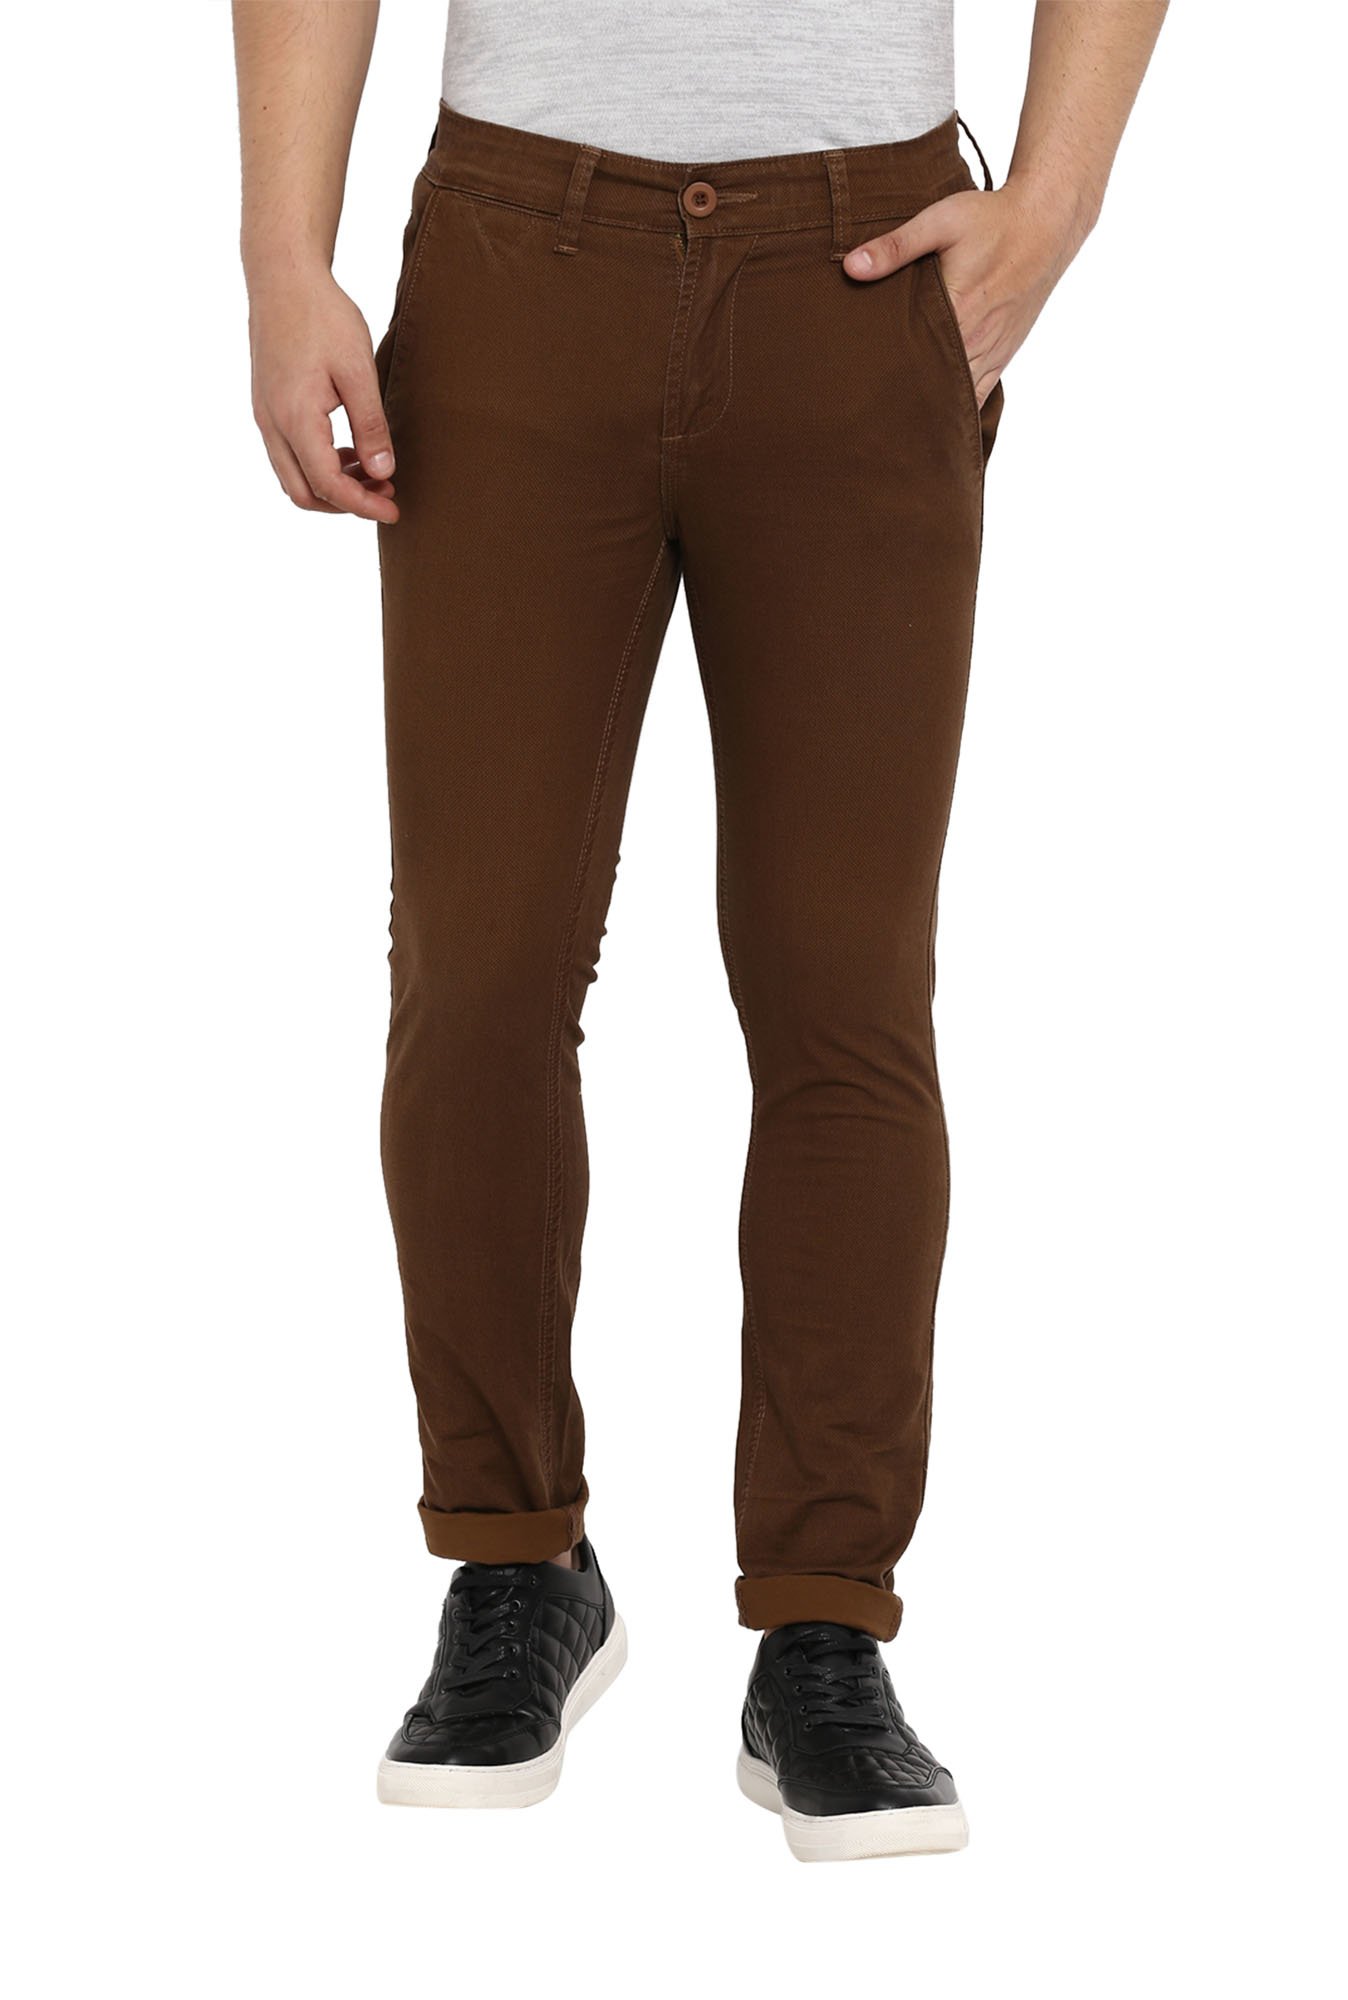 Mufti Slim Fit Trousers - Buy Mufti Slim Fit Trousers online in India